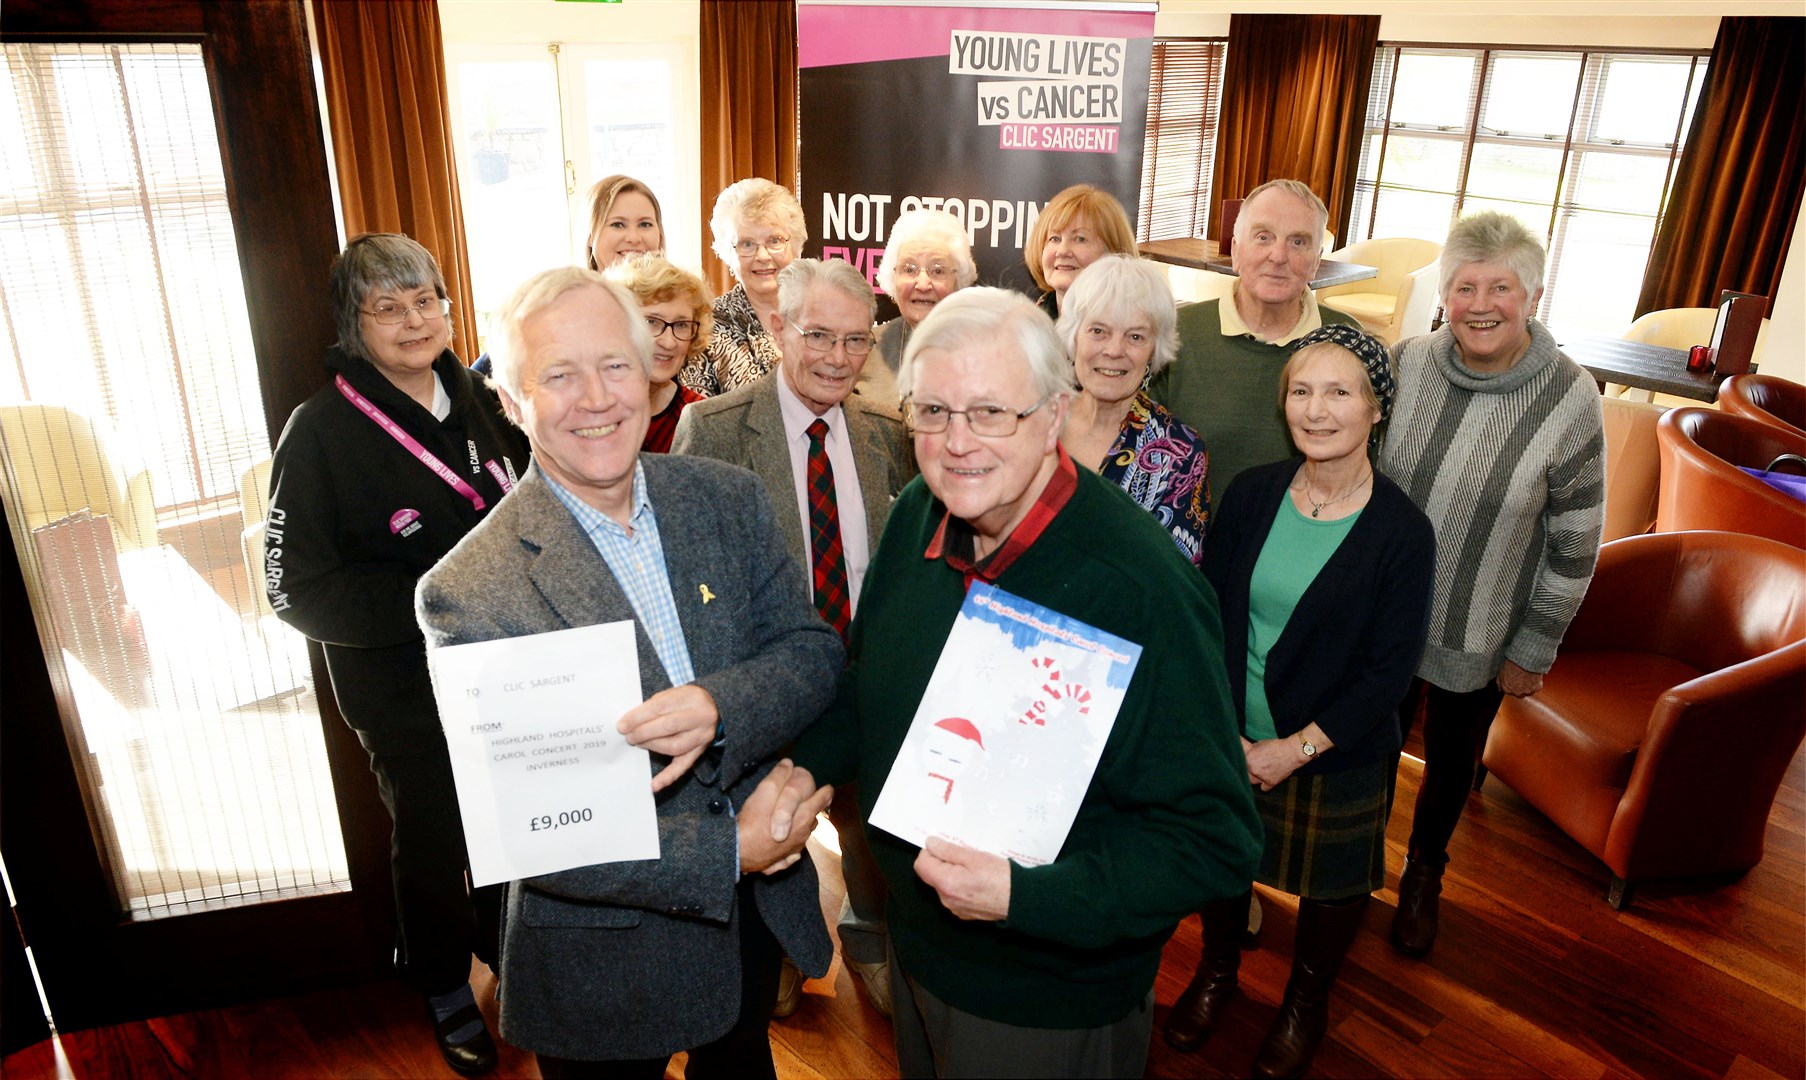 David Dean, (front right) gives the donation to Ian Gibson (front left) of Clic Sargent. Picture: James MacKenzie.